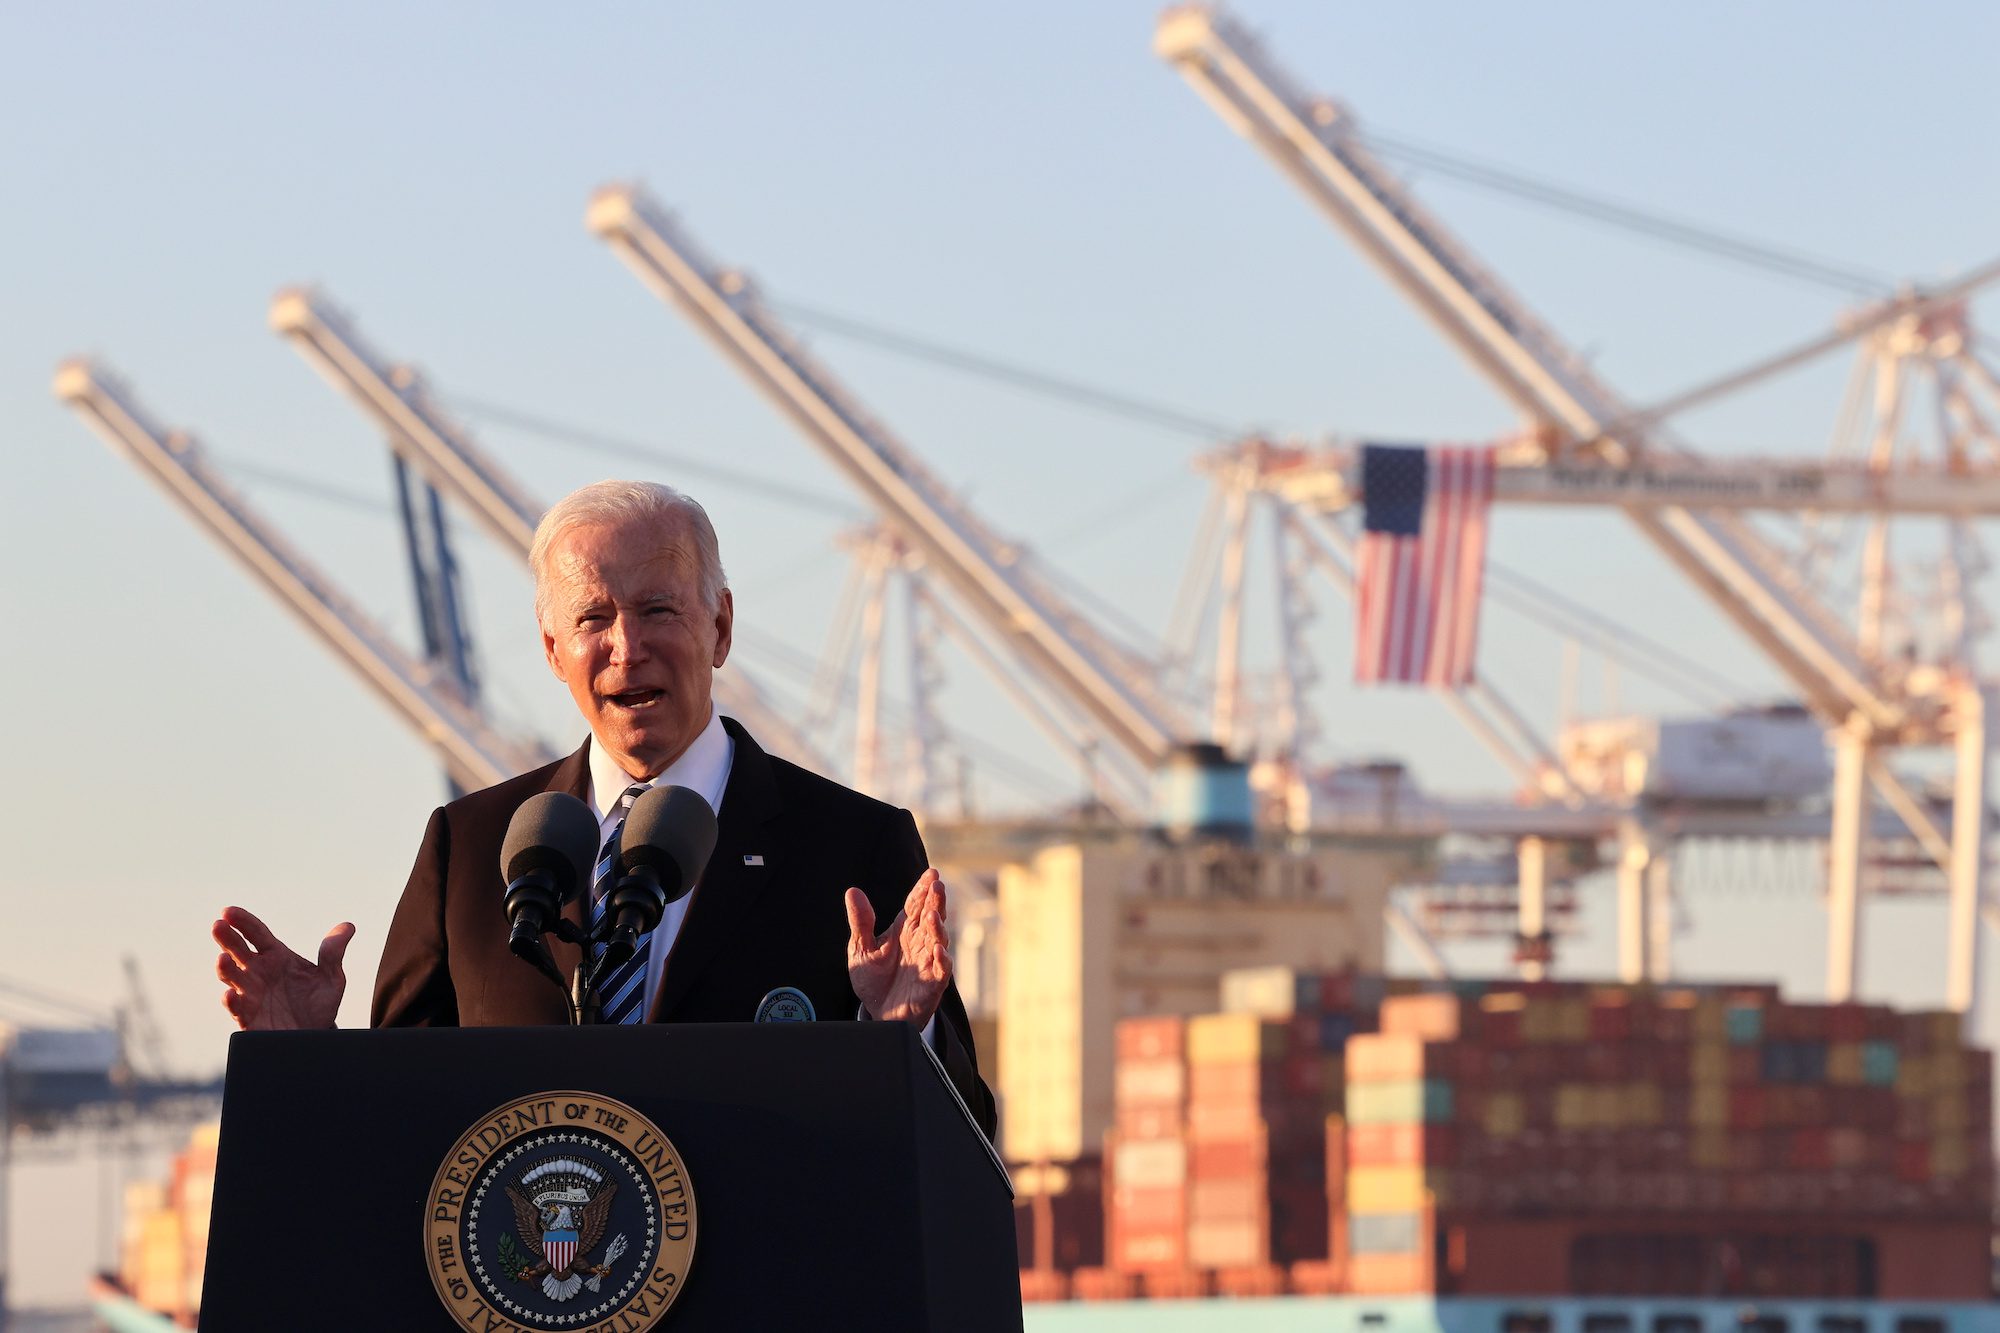 Port of Baltimore Success Story Gives Biden A Chance to Tout His Infrastructure Plans